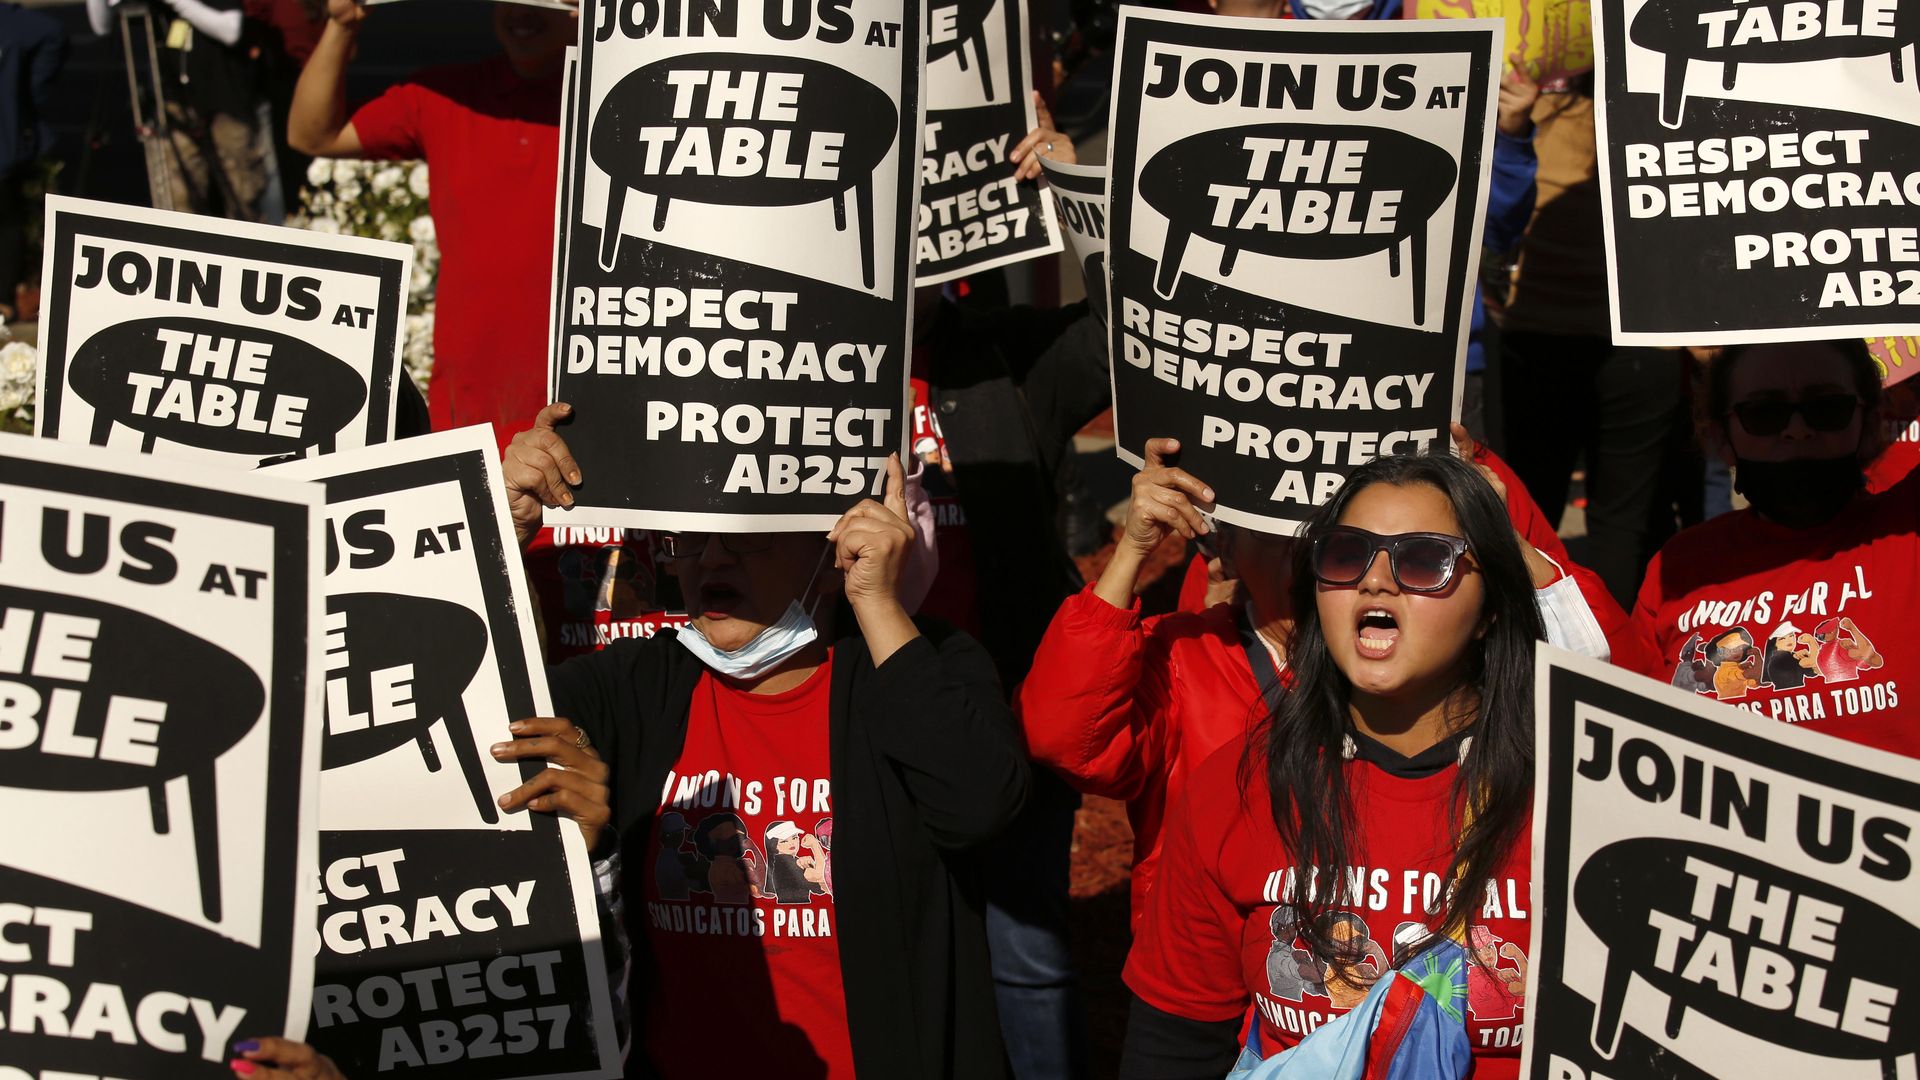 Dozens of fast-food cooks and cashiers in Los Angeles gather to demand that McDonalds, Starbucks and other chains drop their referendum seeking to overturn AB 257  